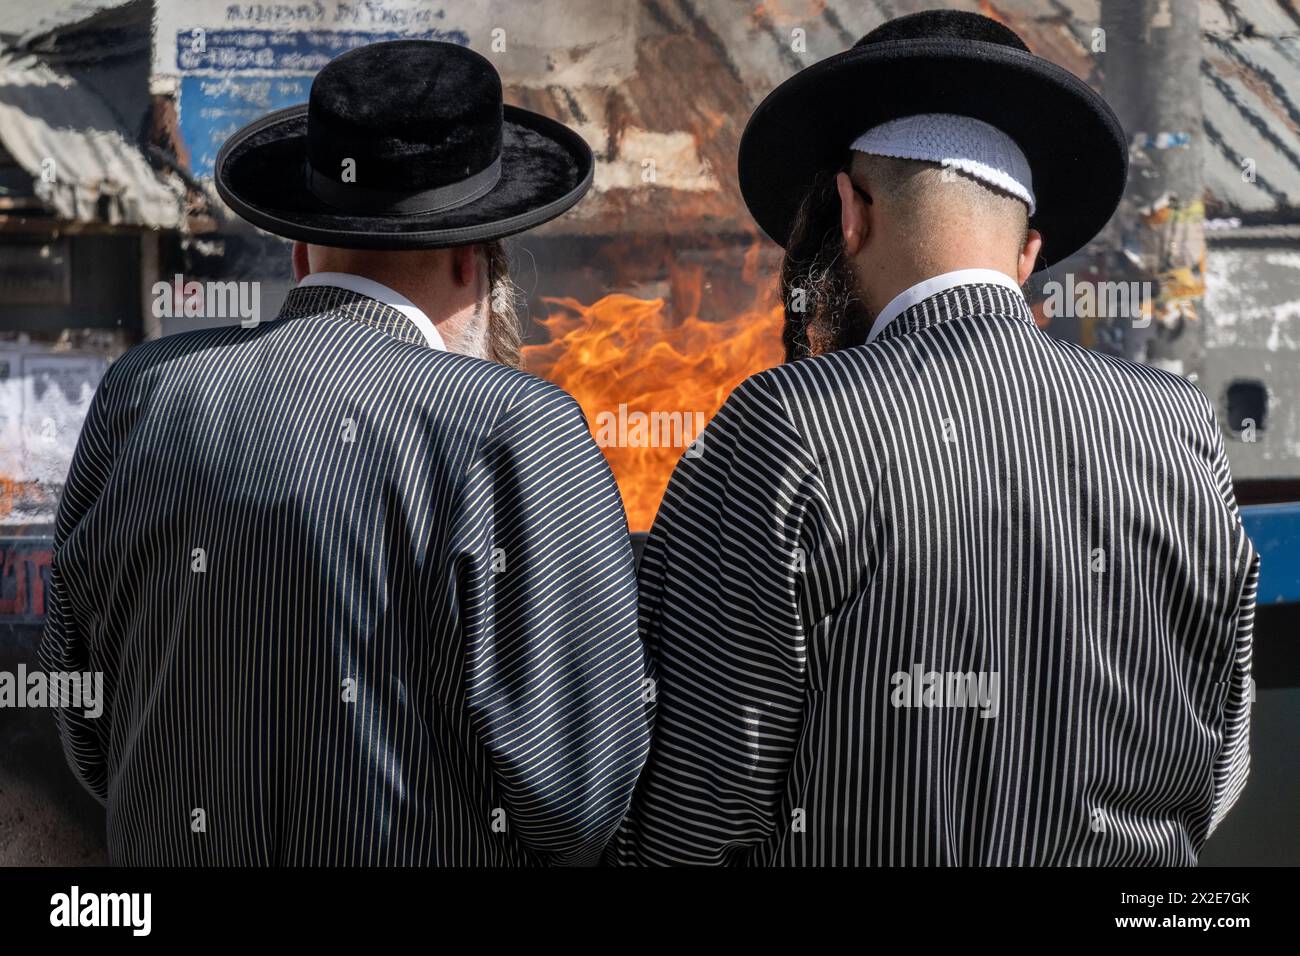 Jerusalem, Israel. 22nd Apr, 2024. Ultra Orthodox Jews burn scraps of bread, leavened goods and items made of yeast in the ceremonial biur chametz, burning of leavened bread, meant to cleanse the country during Passover, which begins this afternoon at sunset. Credit: Nir Alon/Alamy Live News Stock Photo